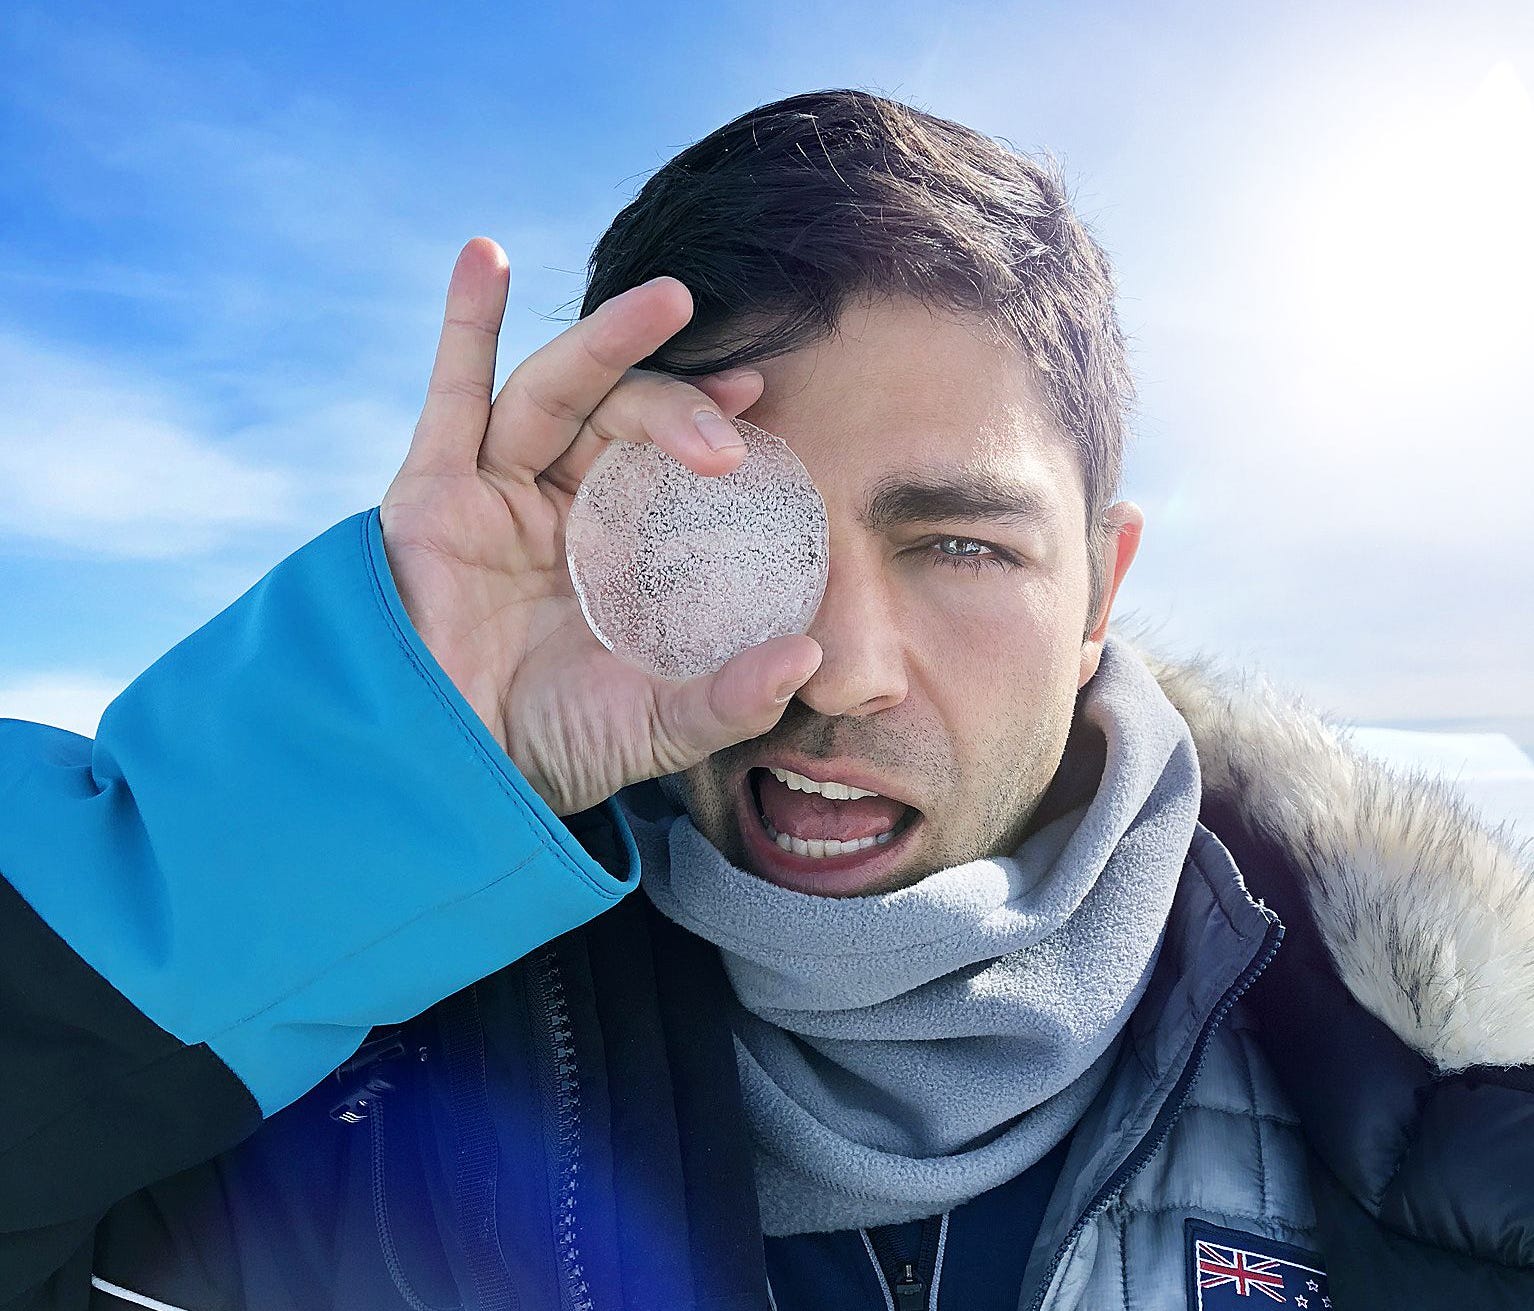 U.S. actor and environmentalist Adrian Grenier checks out an ice-core sample as part of a new Antarctica-focused safety video for Air New Zealand.